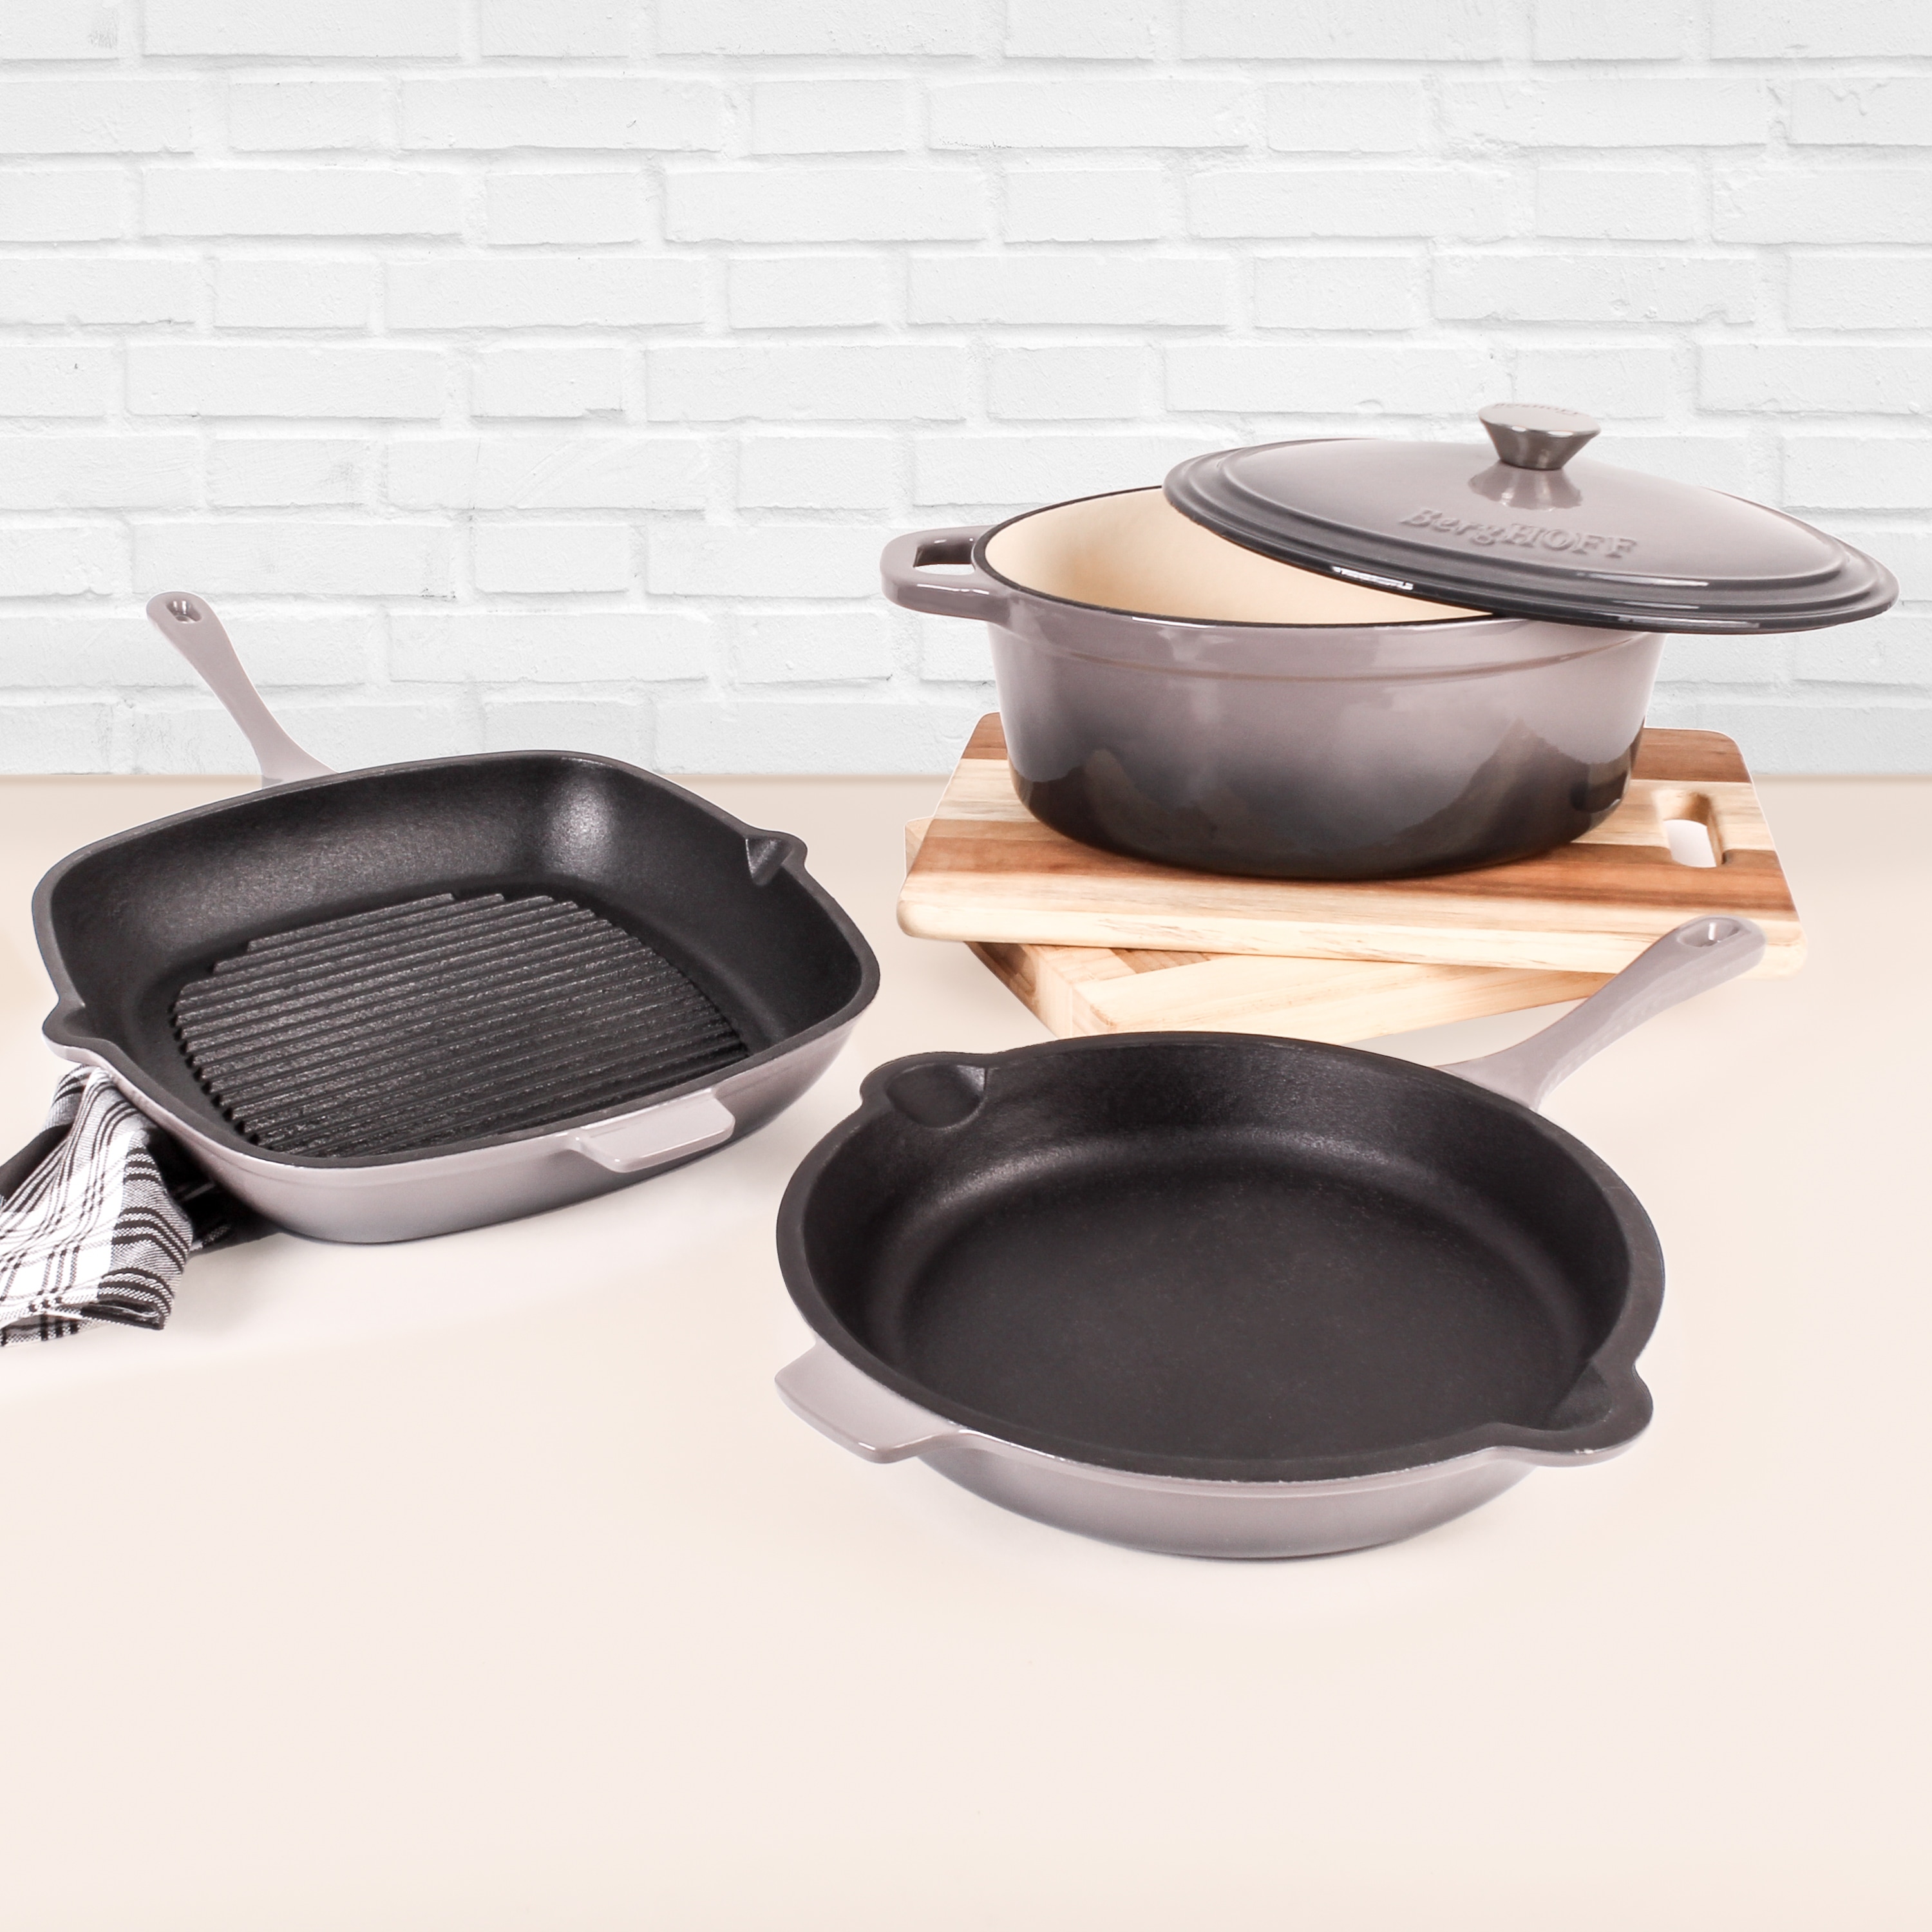 https://ak1.ostkcdn.com/images/products/is/images/direct/4b7114f1e2ca4a511d5bb7376608b38c09f2bd79/Neo-Cast-Iron-4pc-Set-F-P-G-P-%26-5-Qt-Cov-Dutch-Oven-Oyster.jpg